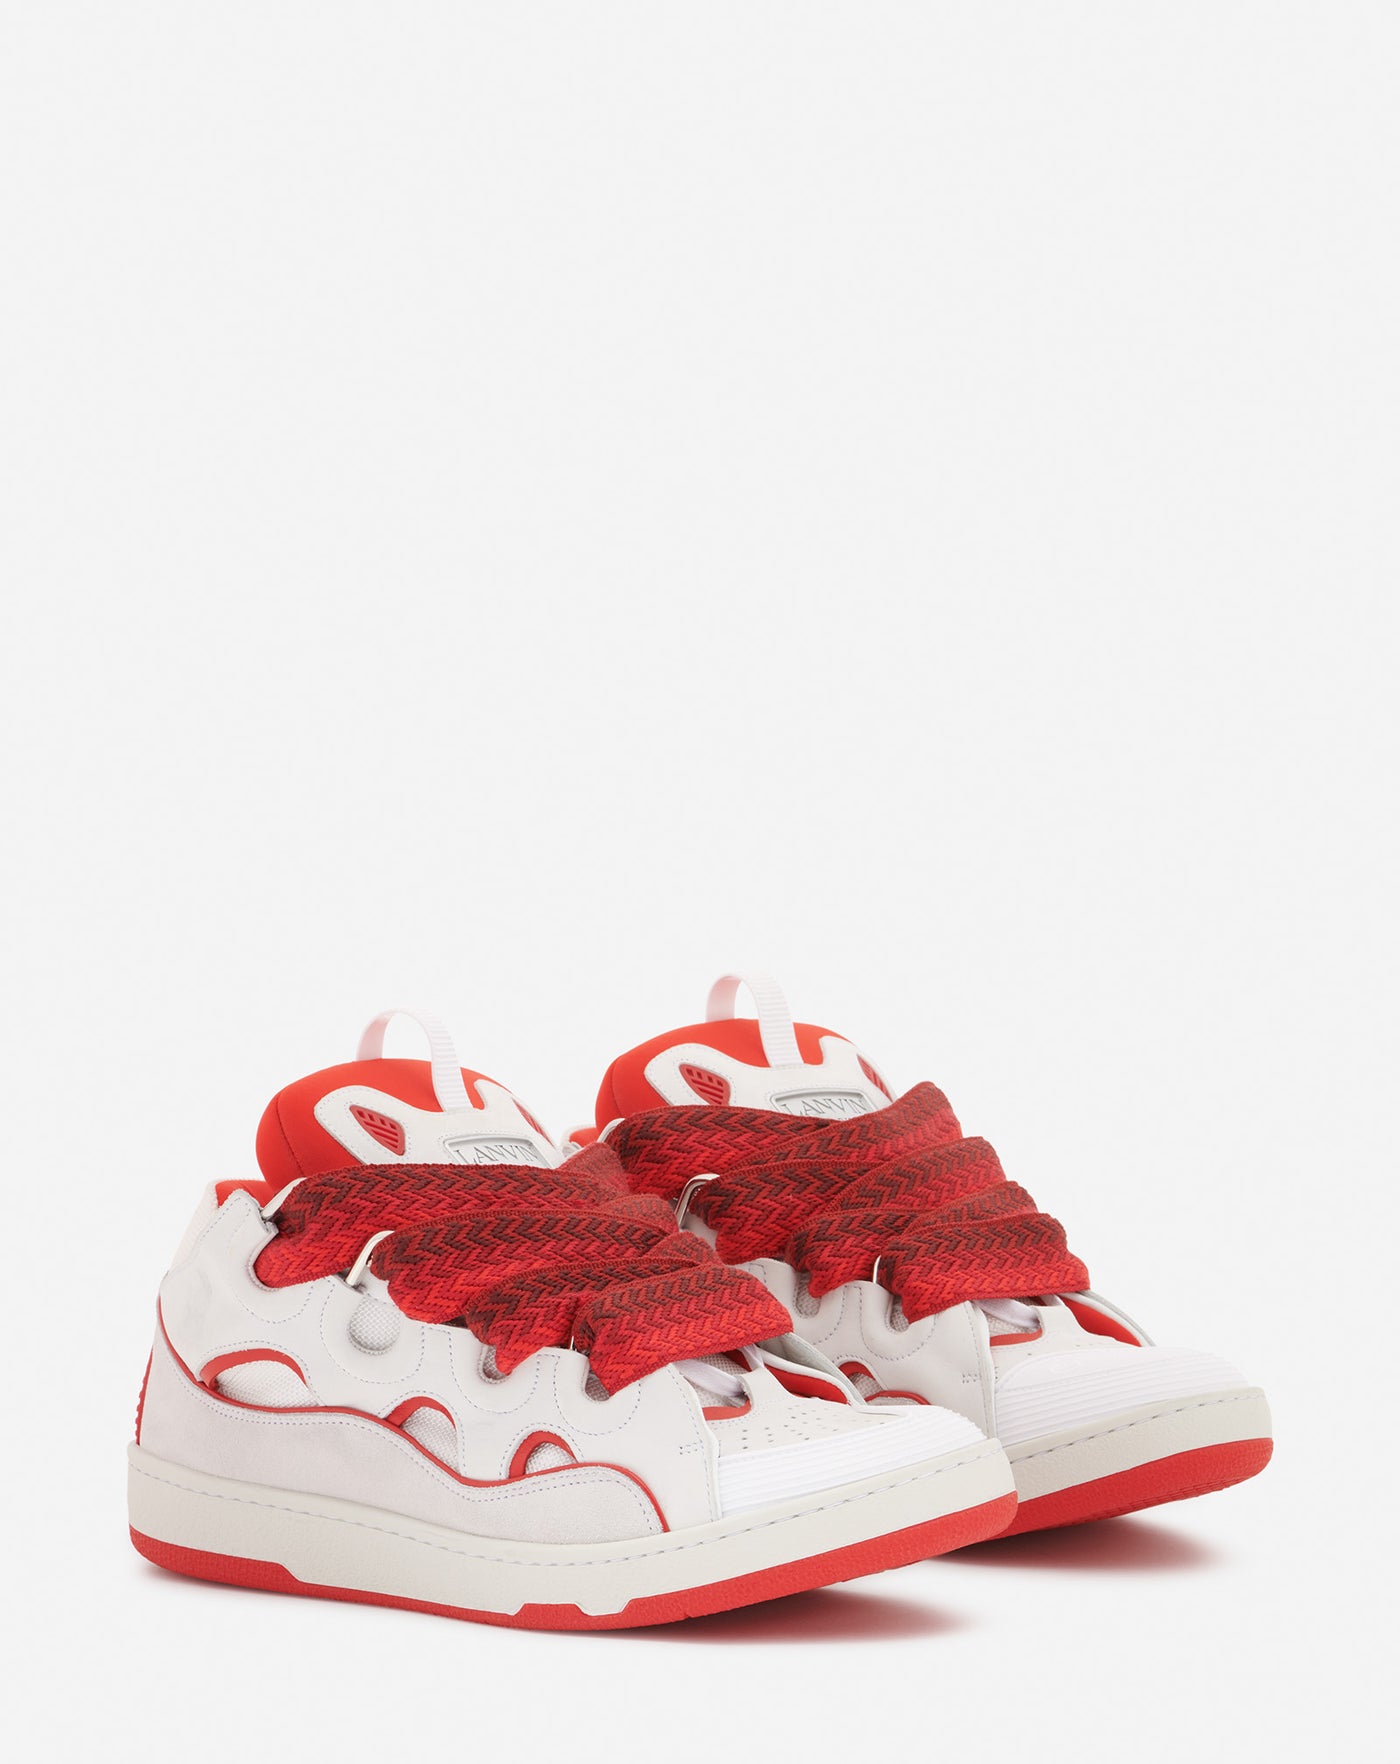 LEATHER CURB SNEAKERS WHITE/RED | Lanvin – LANVIN